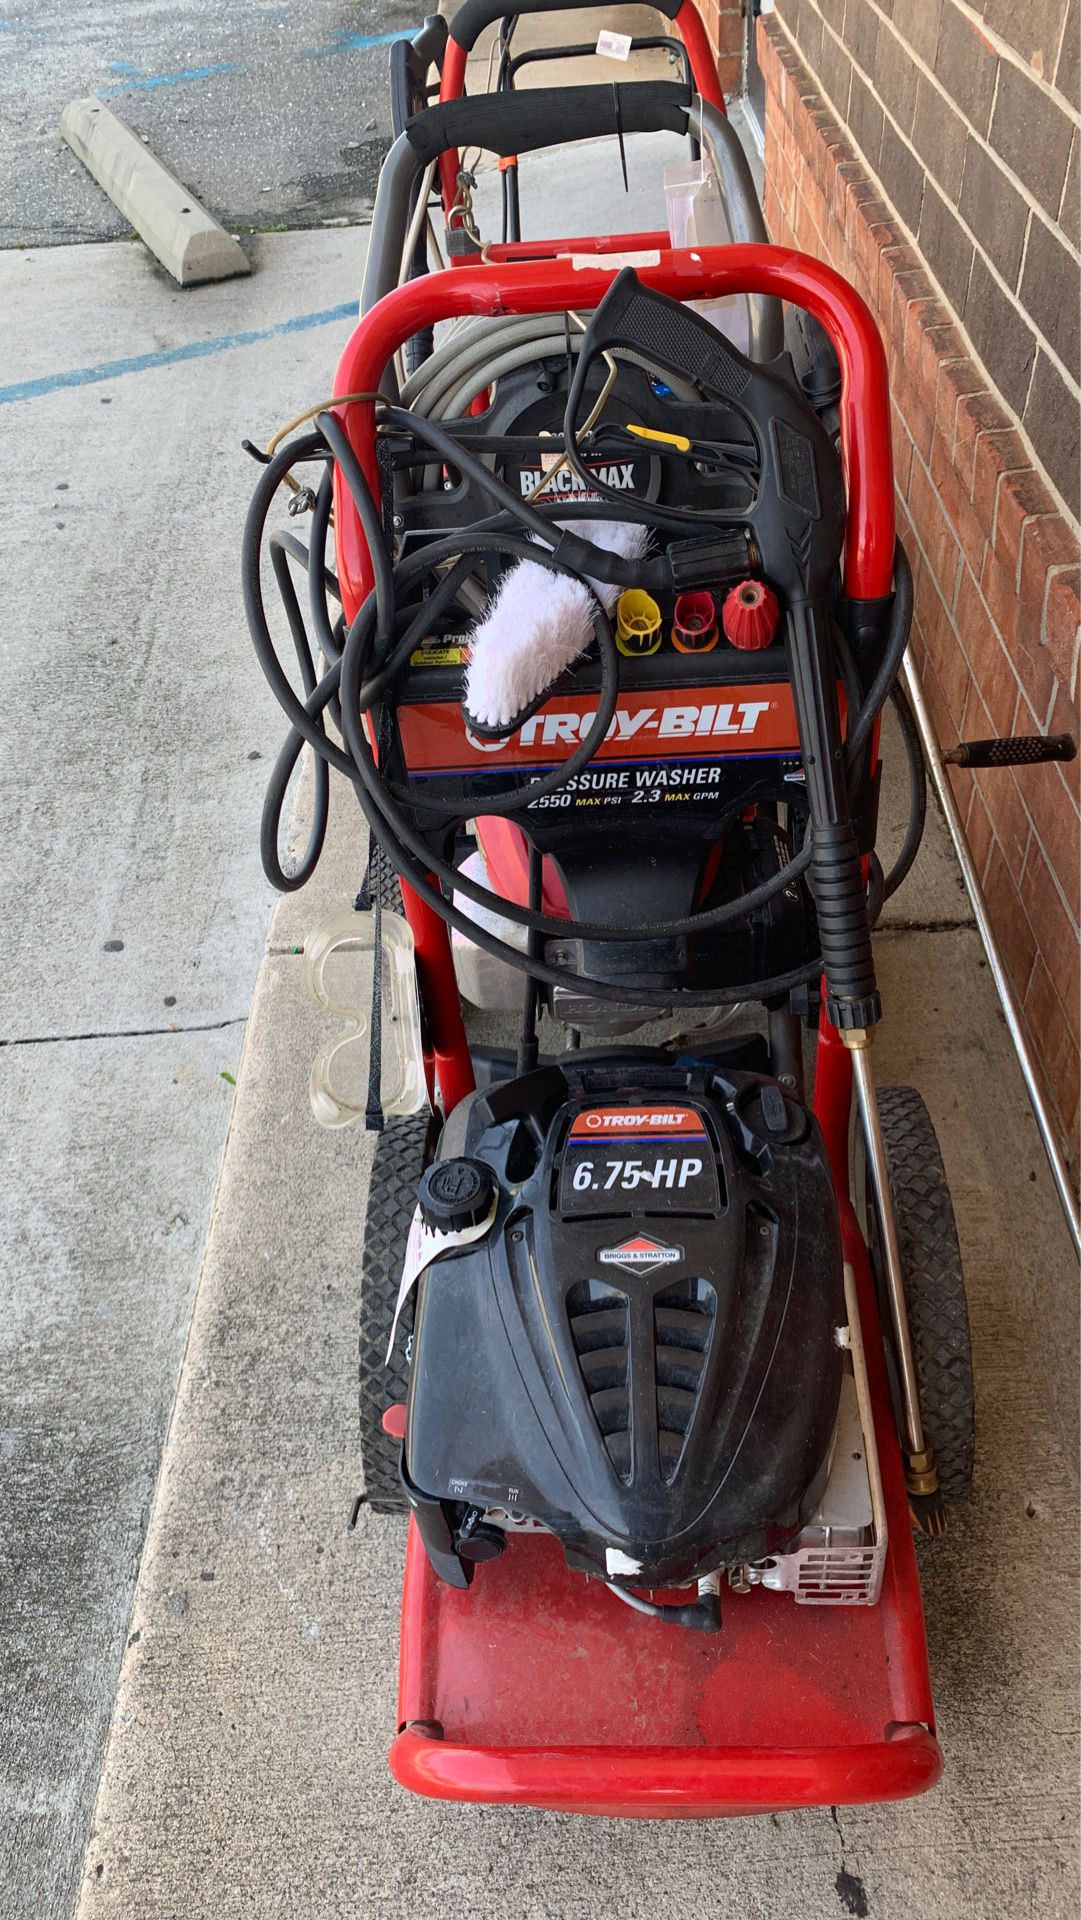 Troy bilt pressure washer 200.00 or layaway for 20 Down